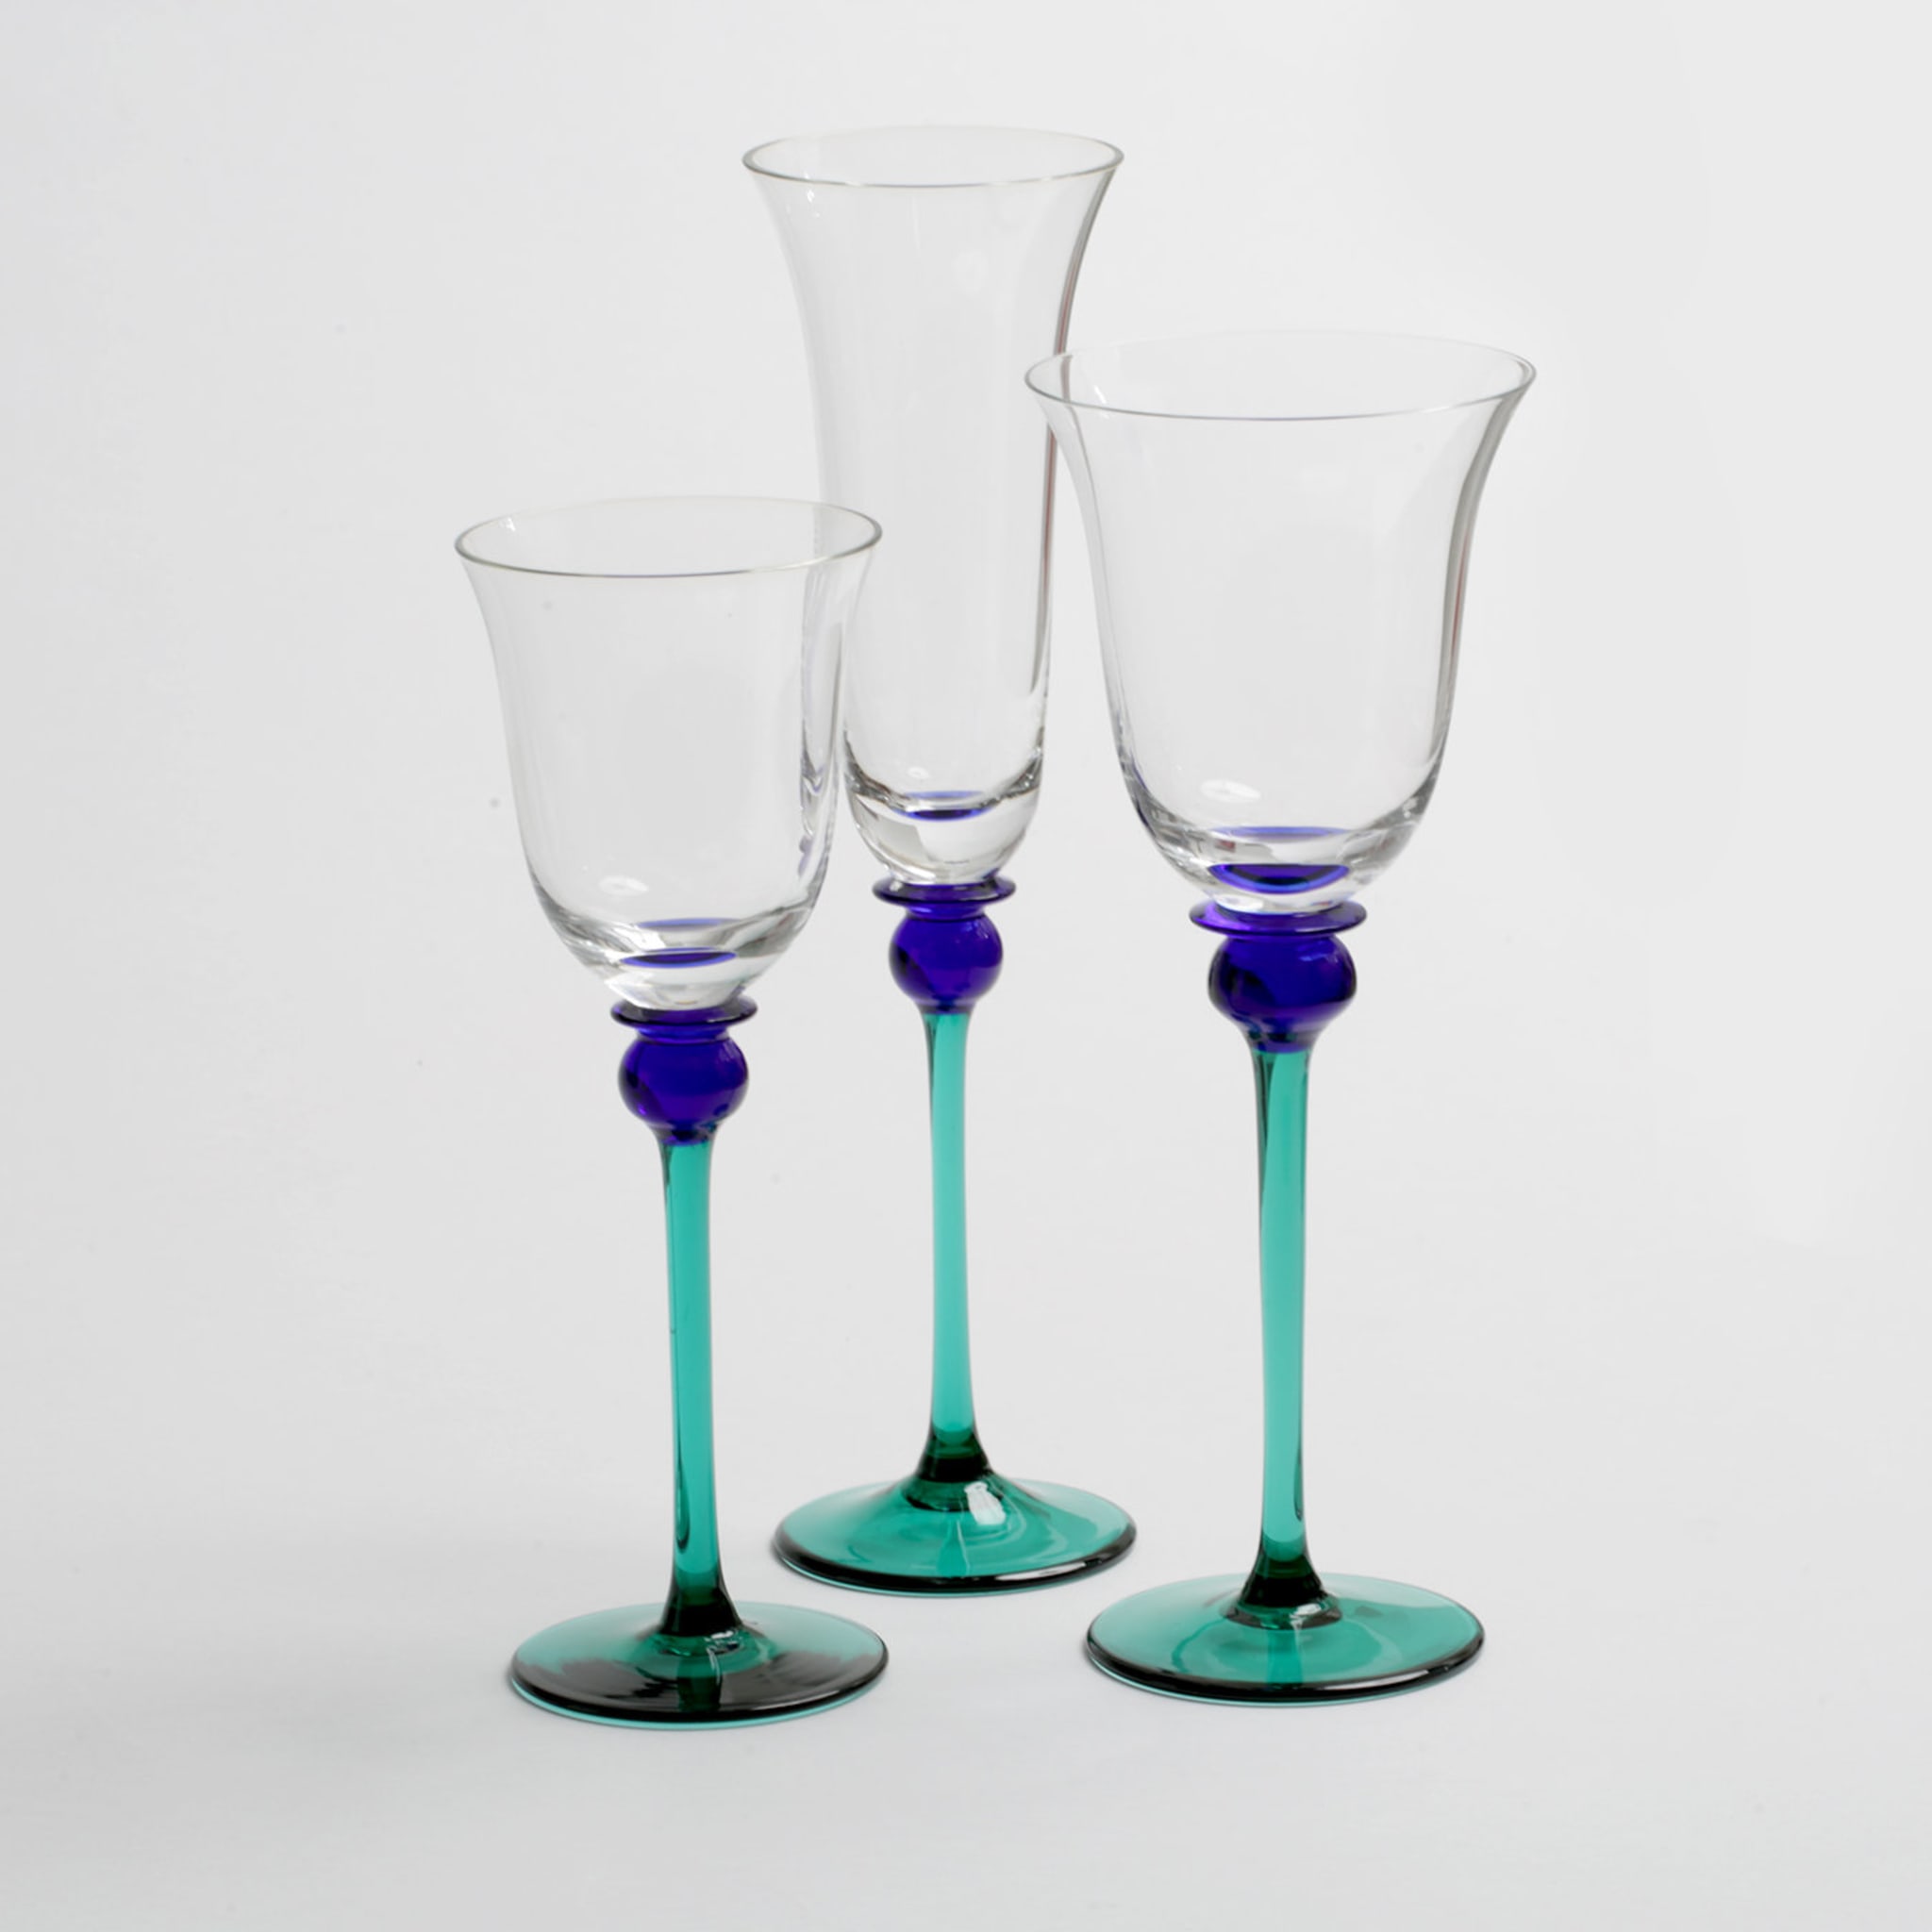 Mazzorbo Set of 3 Glasses for Six and Pitcher - Alternative view 1